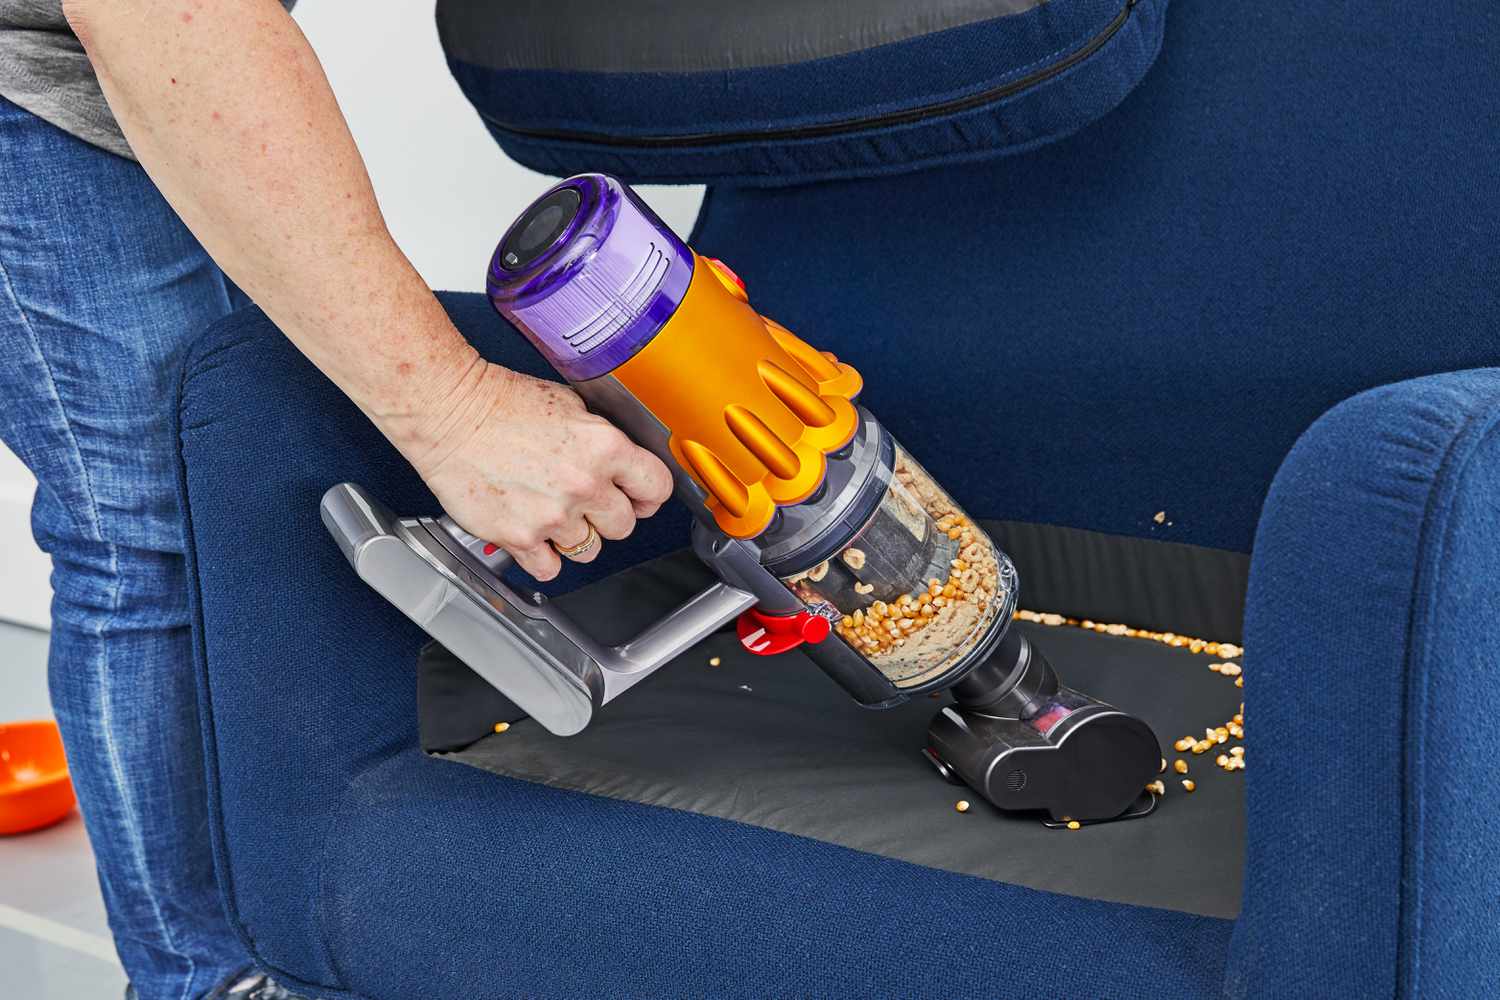 A hand pushing the Dyson V12 Detect Slim over popcorn kettle inside a armchair